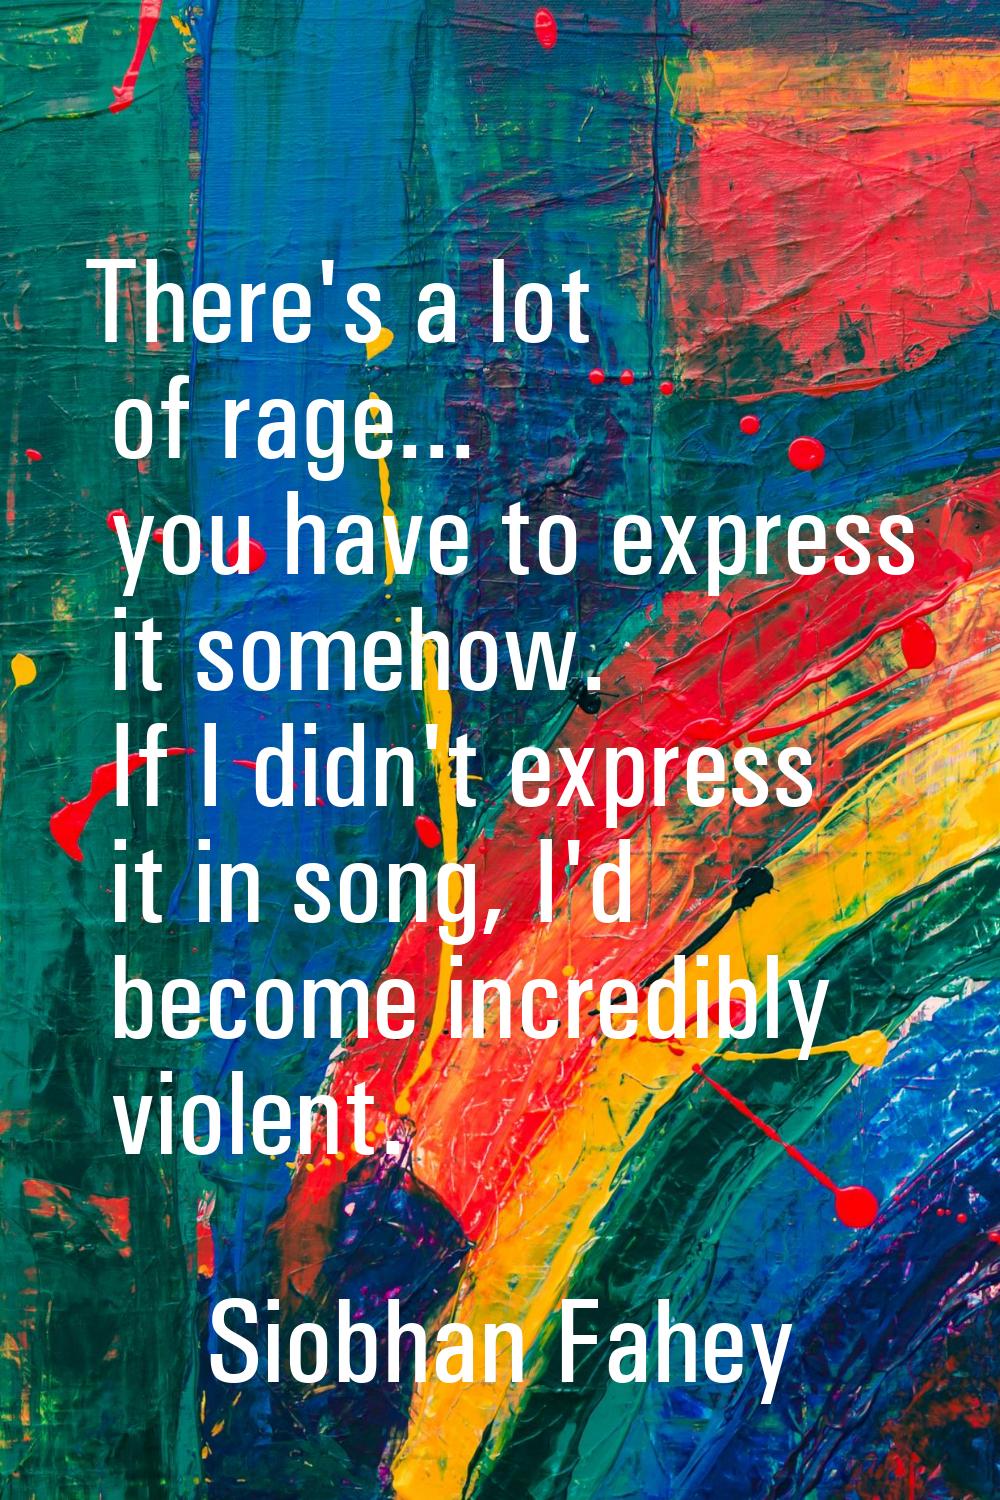 There's a lot of rage... you have to express it somehow. If I didn't express it in song, I'd become